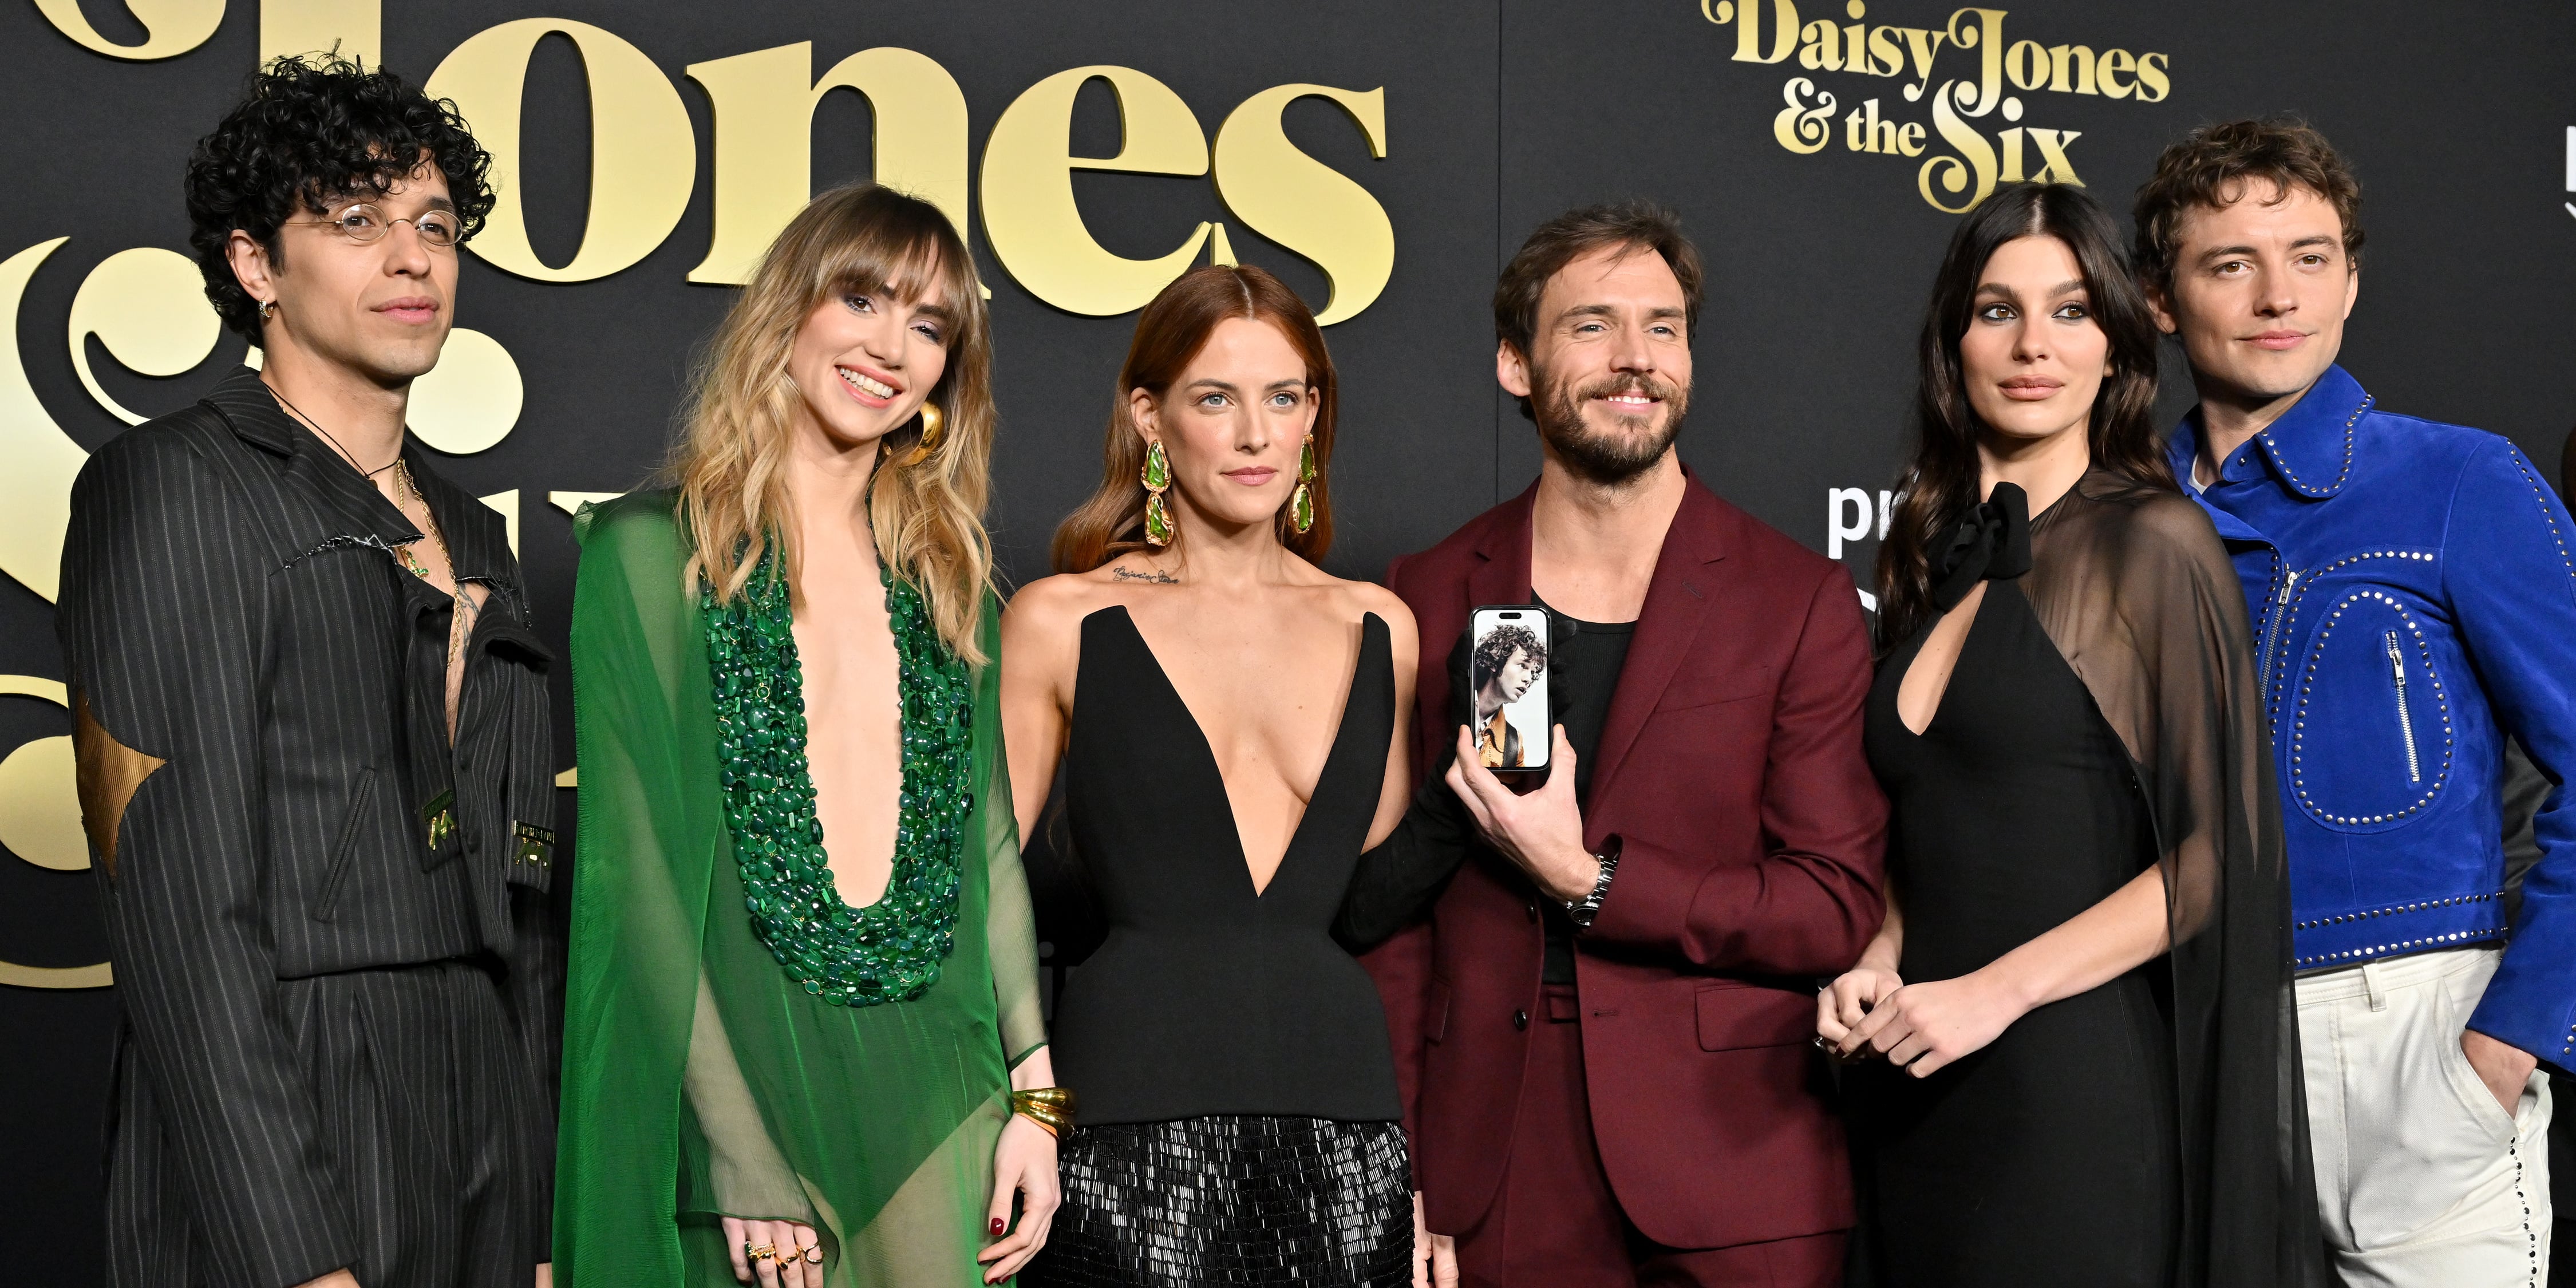 Daisy Jones & The Six': Riley Keough Says 3 Singers Inspired Her Character